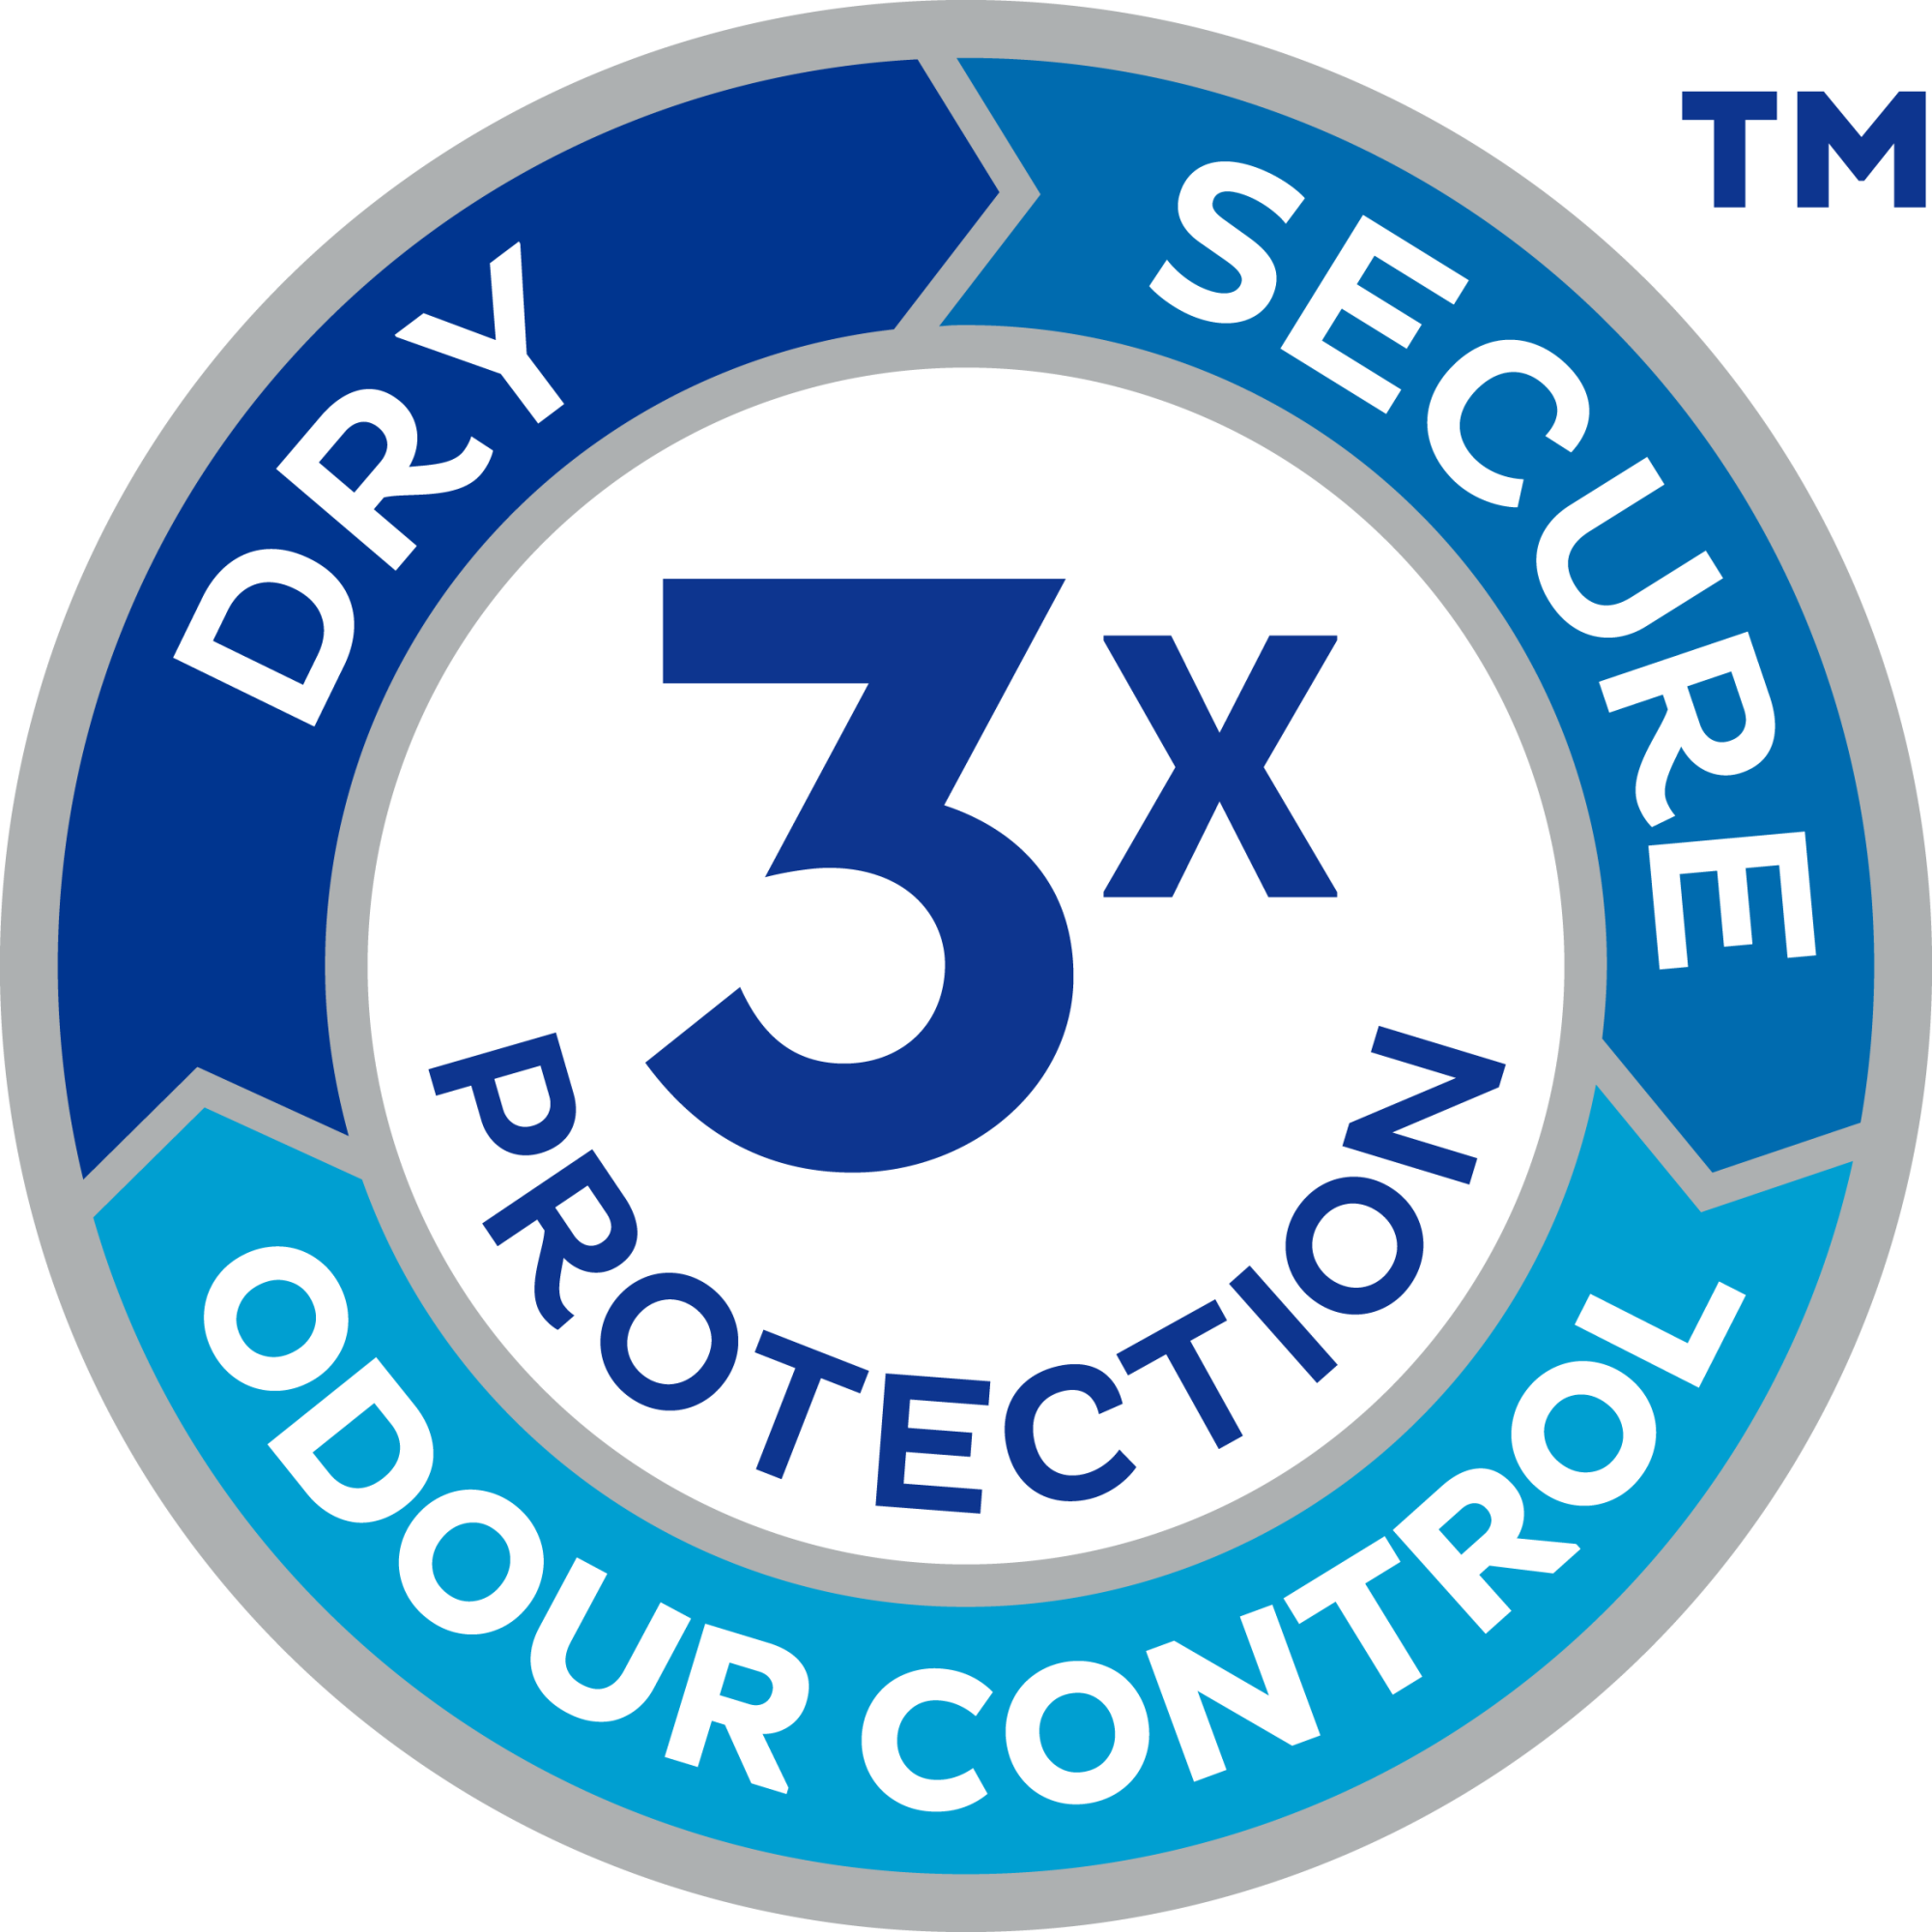 TENA Discreet gives Triple Protection against leaks, odour and moisture